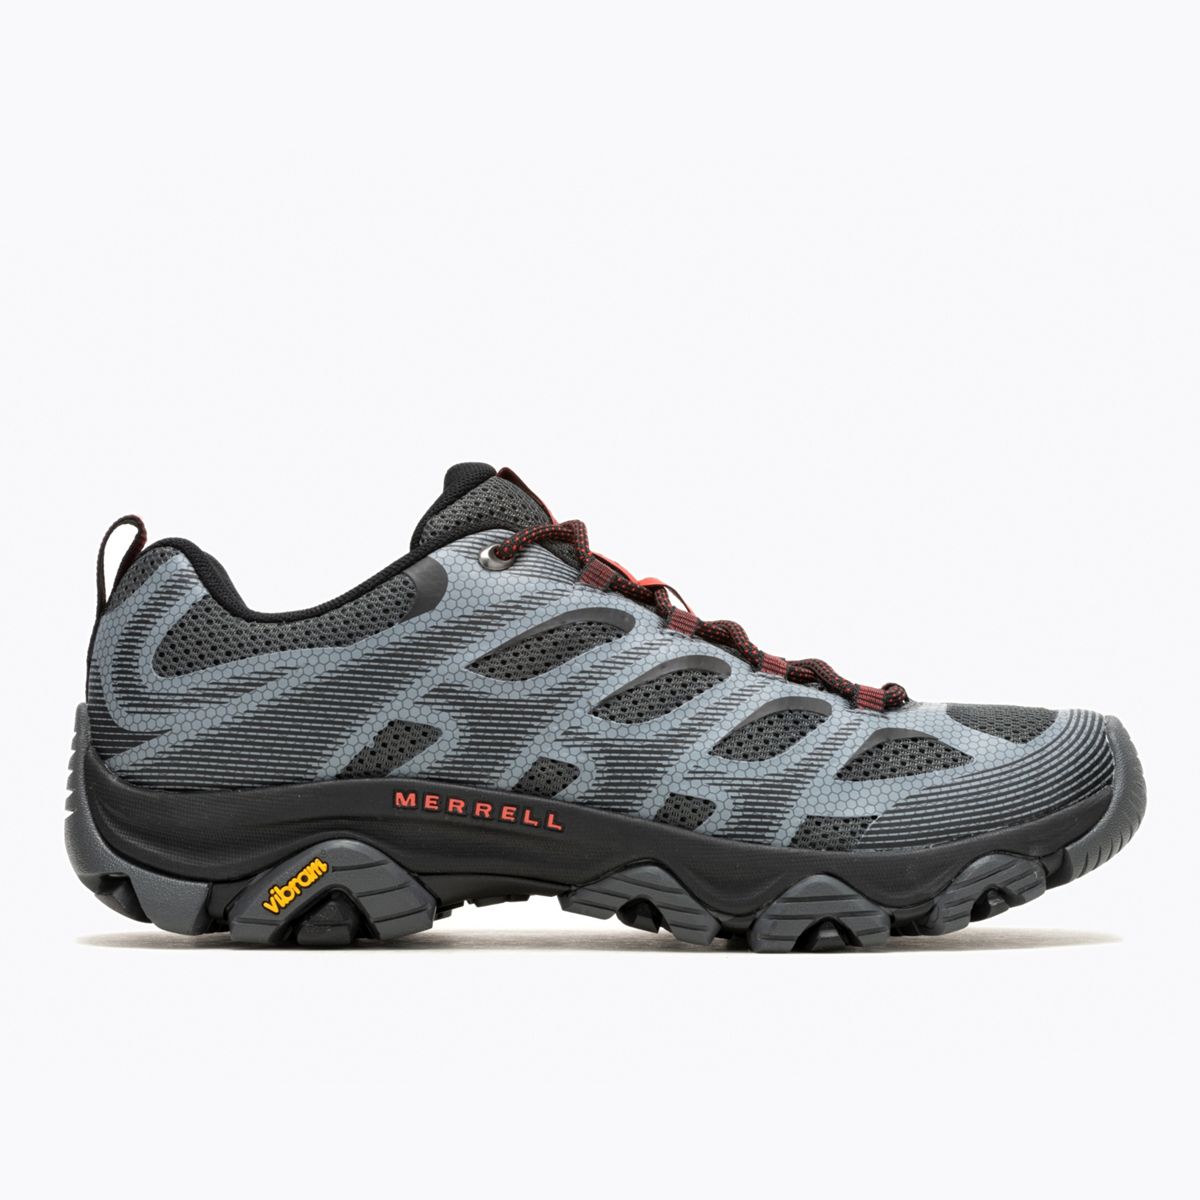 Merrell Moab 3 GTX - Multisport shoes Women's, Free EU Delivery